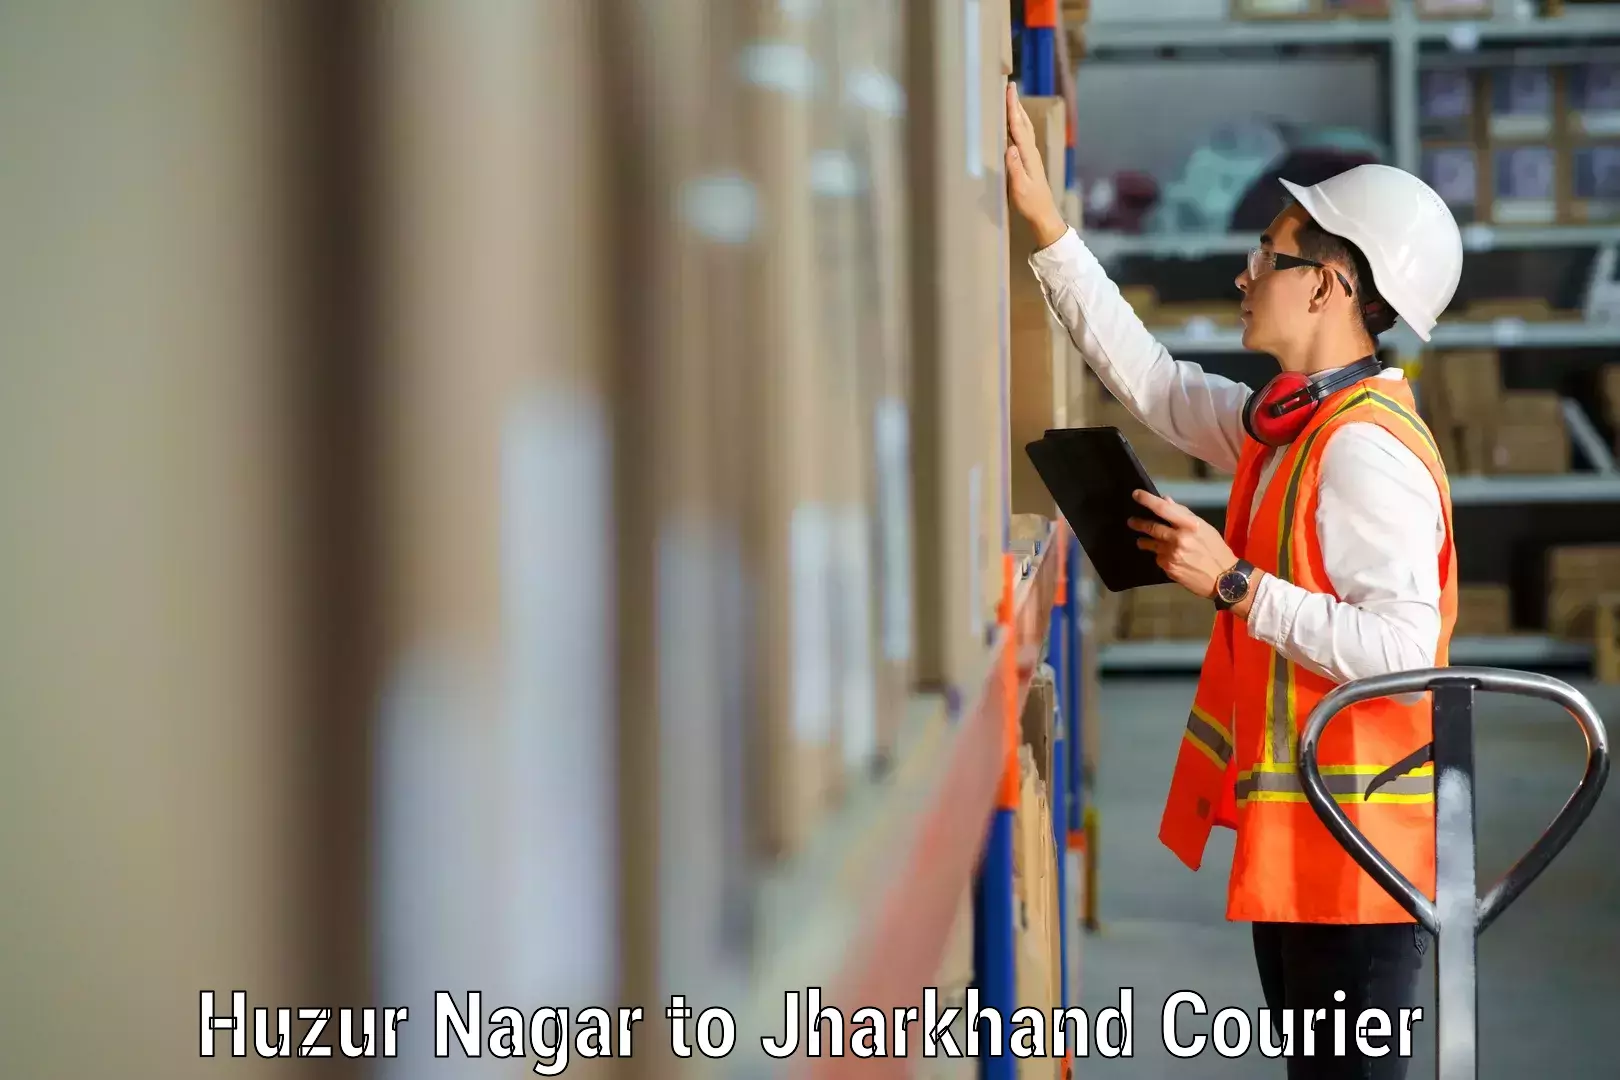 Specialized moving company in Huzur Nagar to East Singhbhum